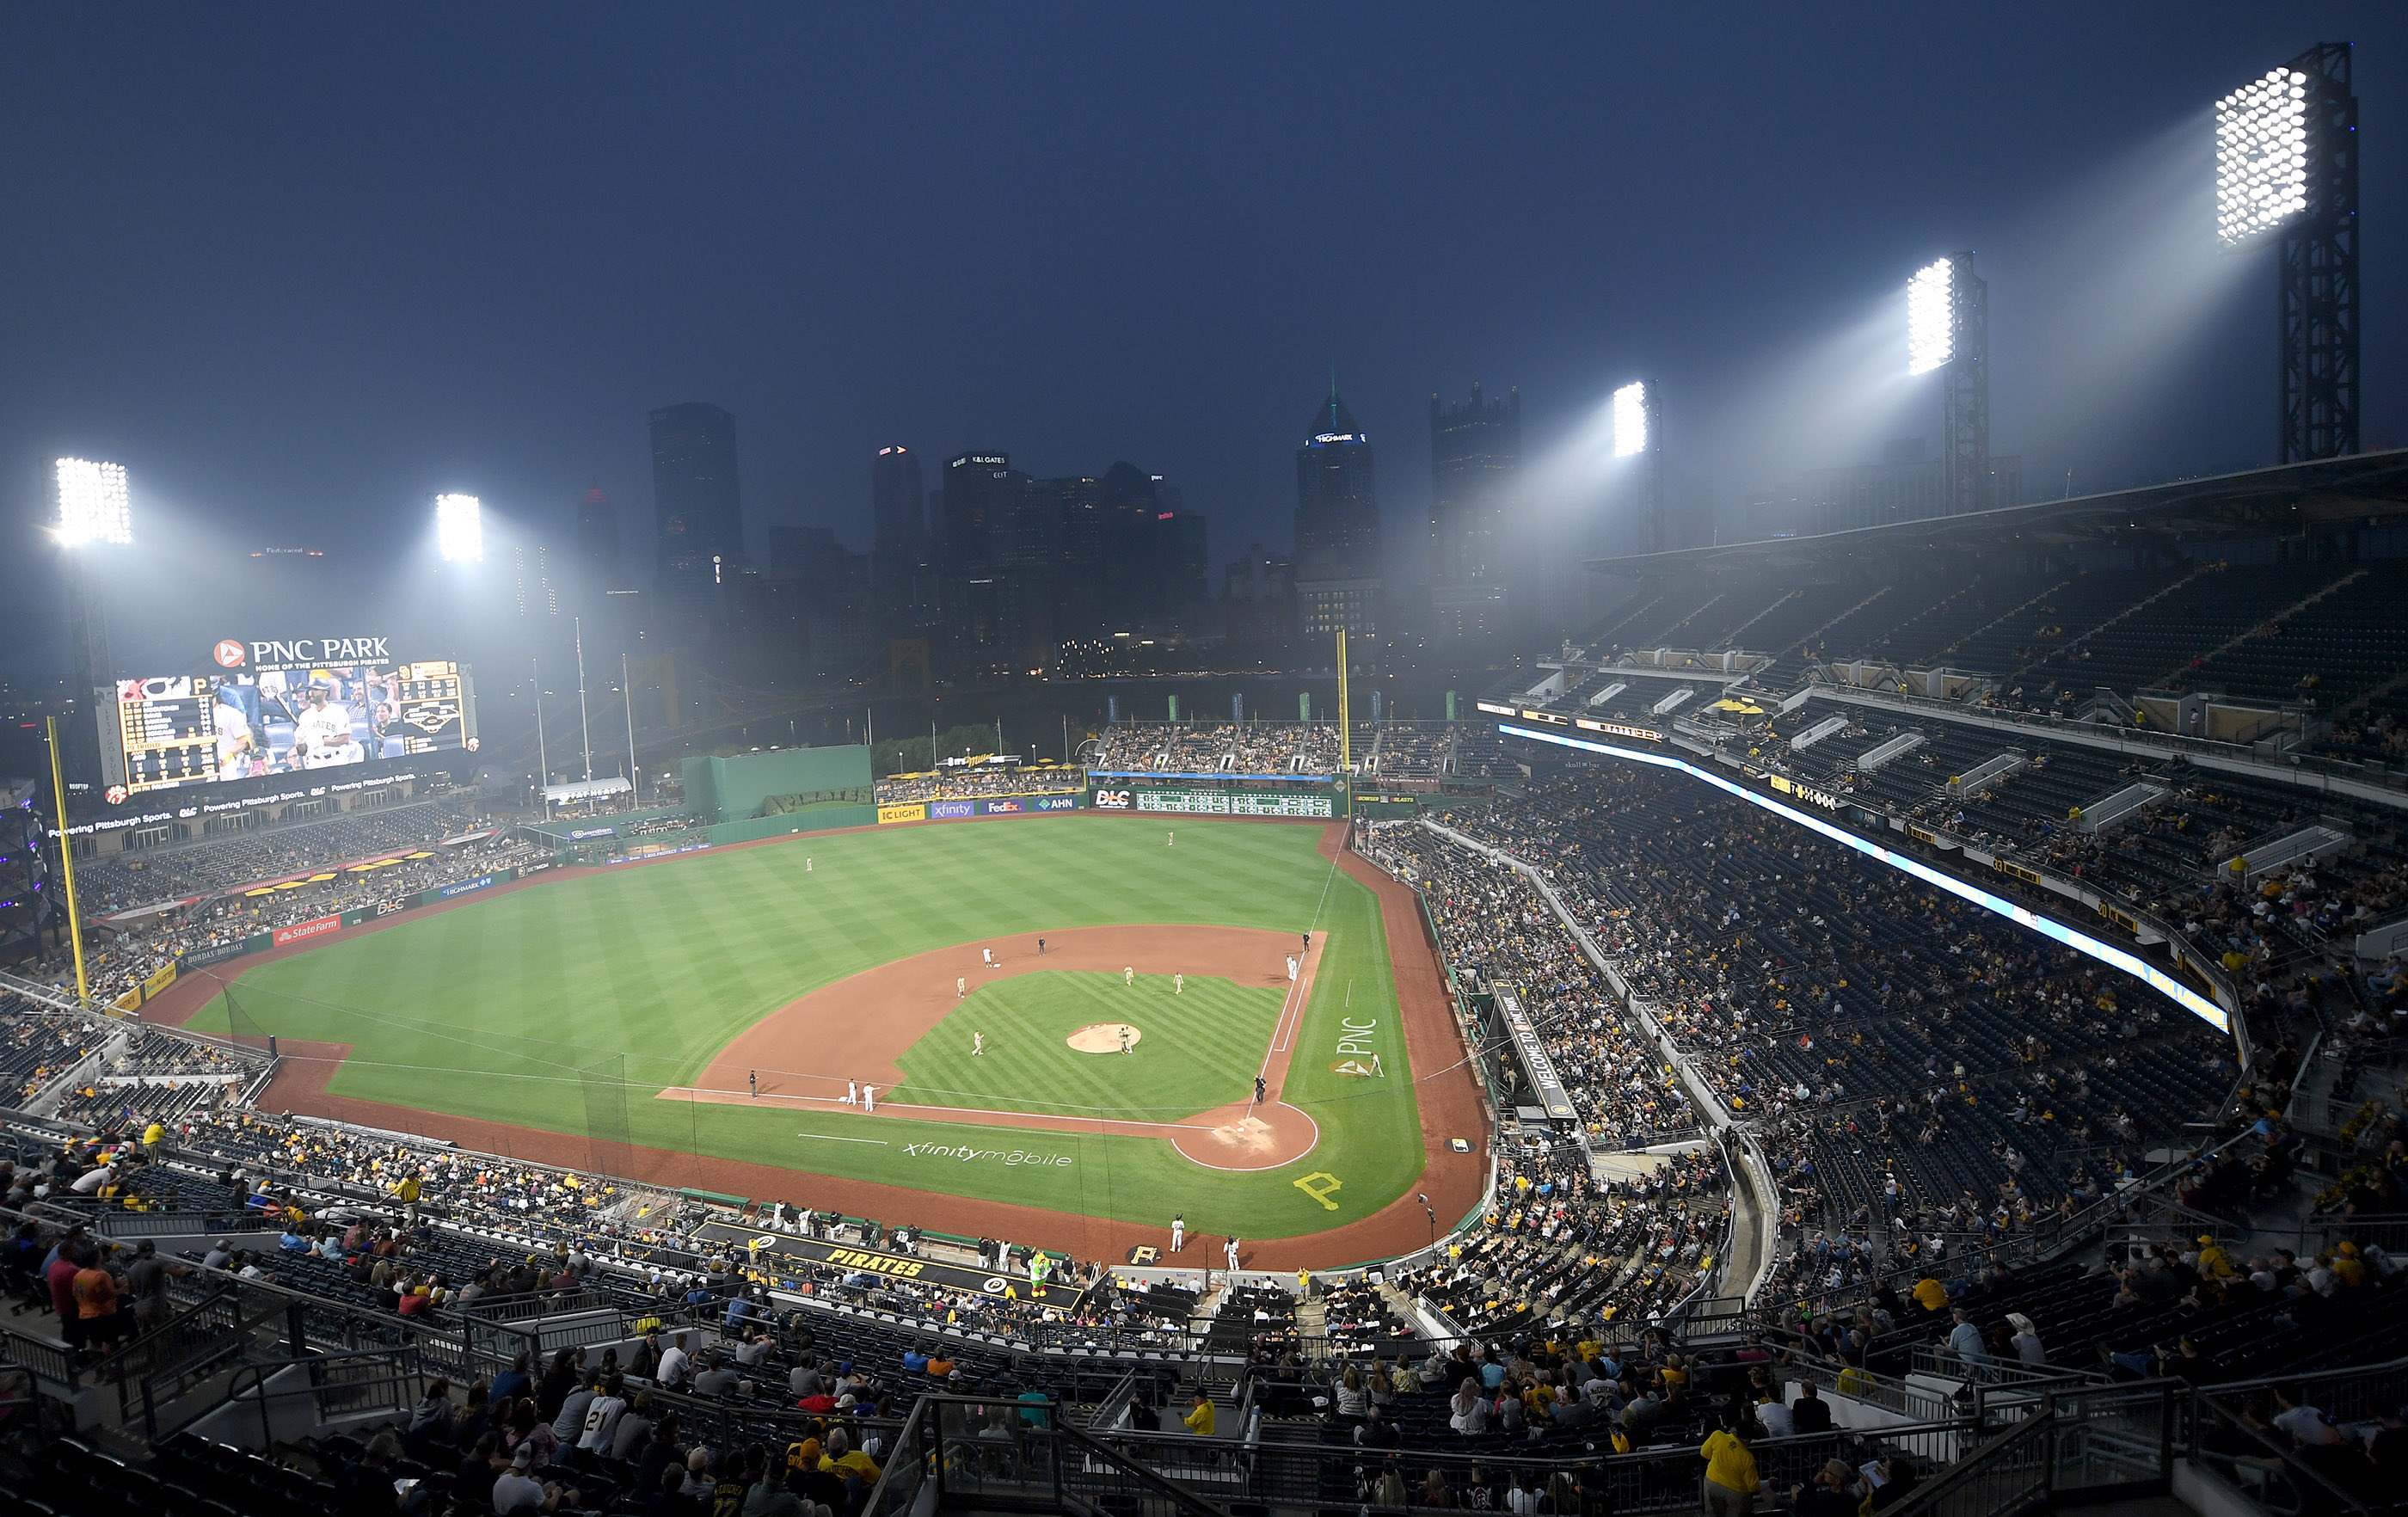 PNC Park: Home of the Pirates